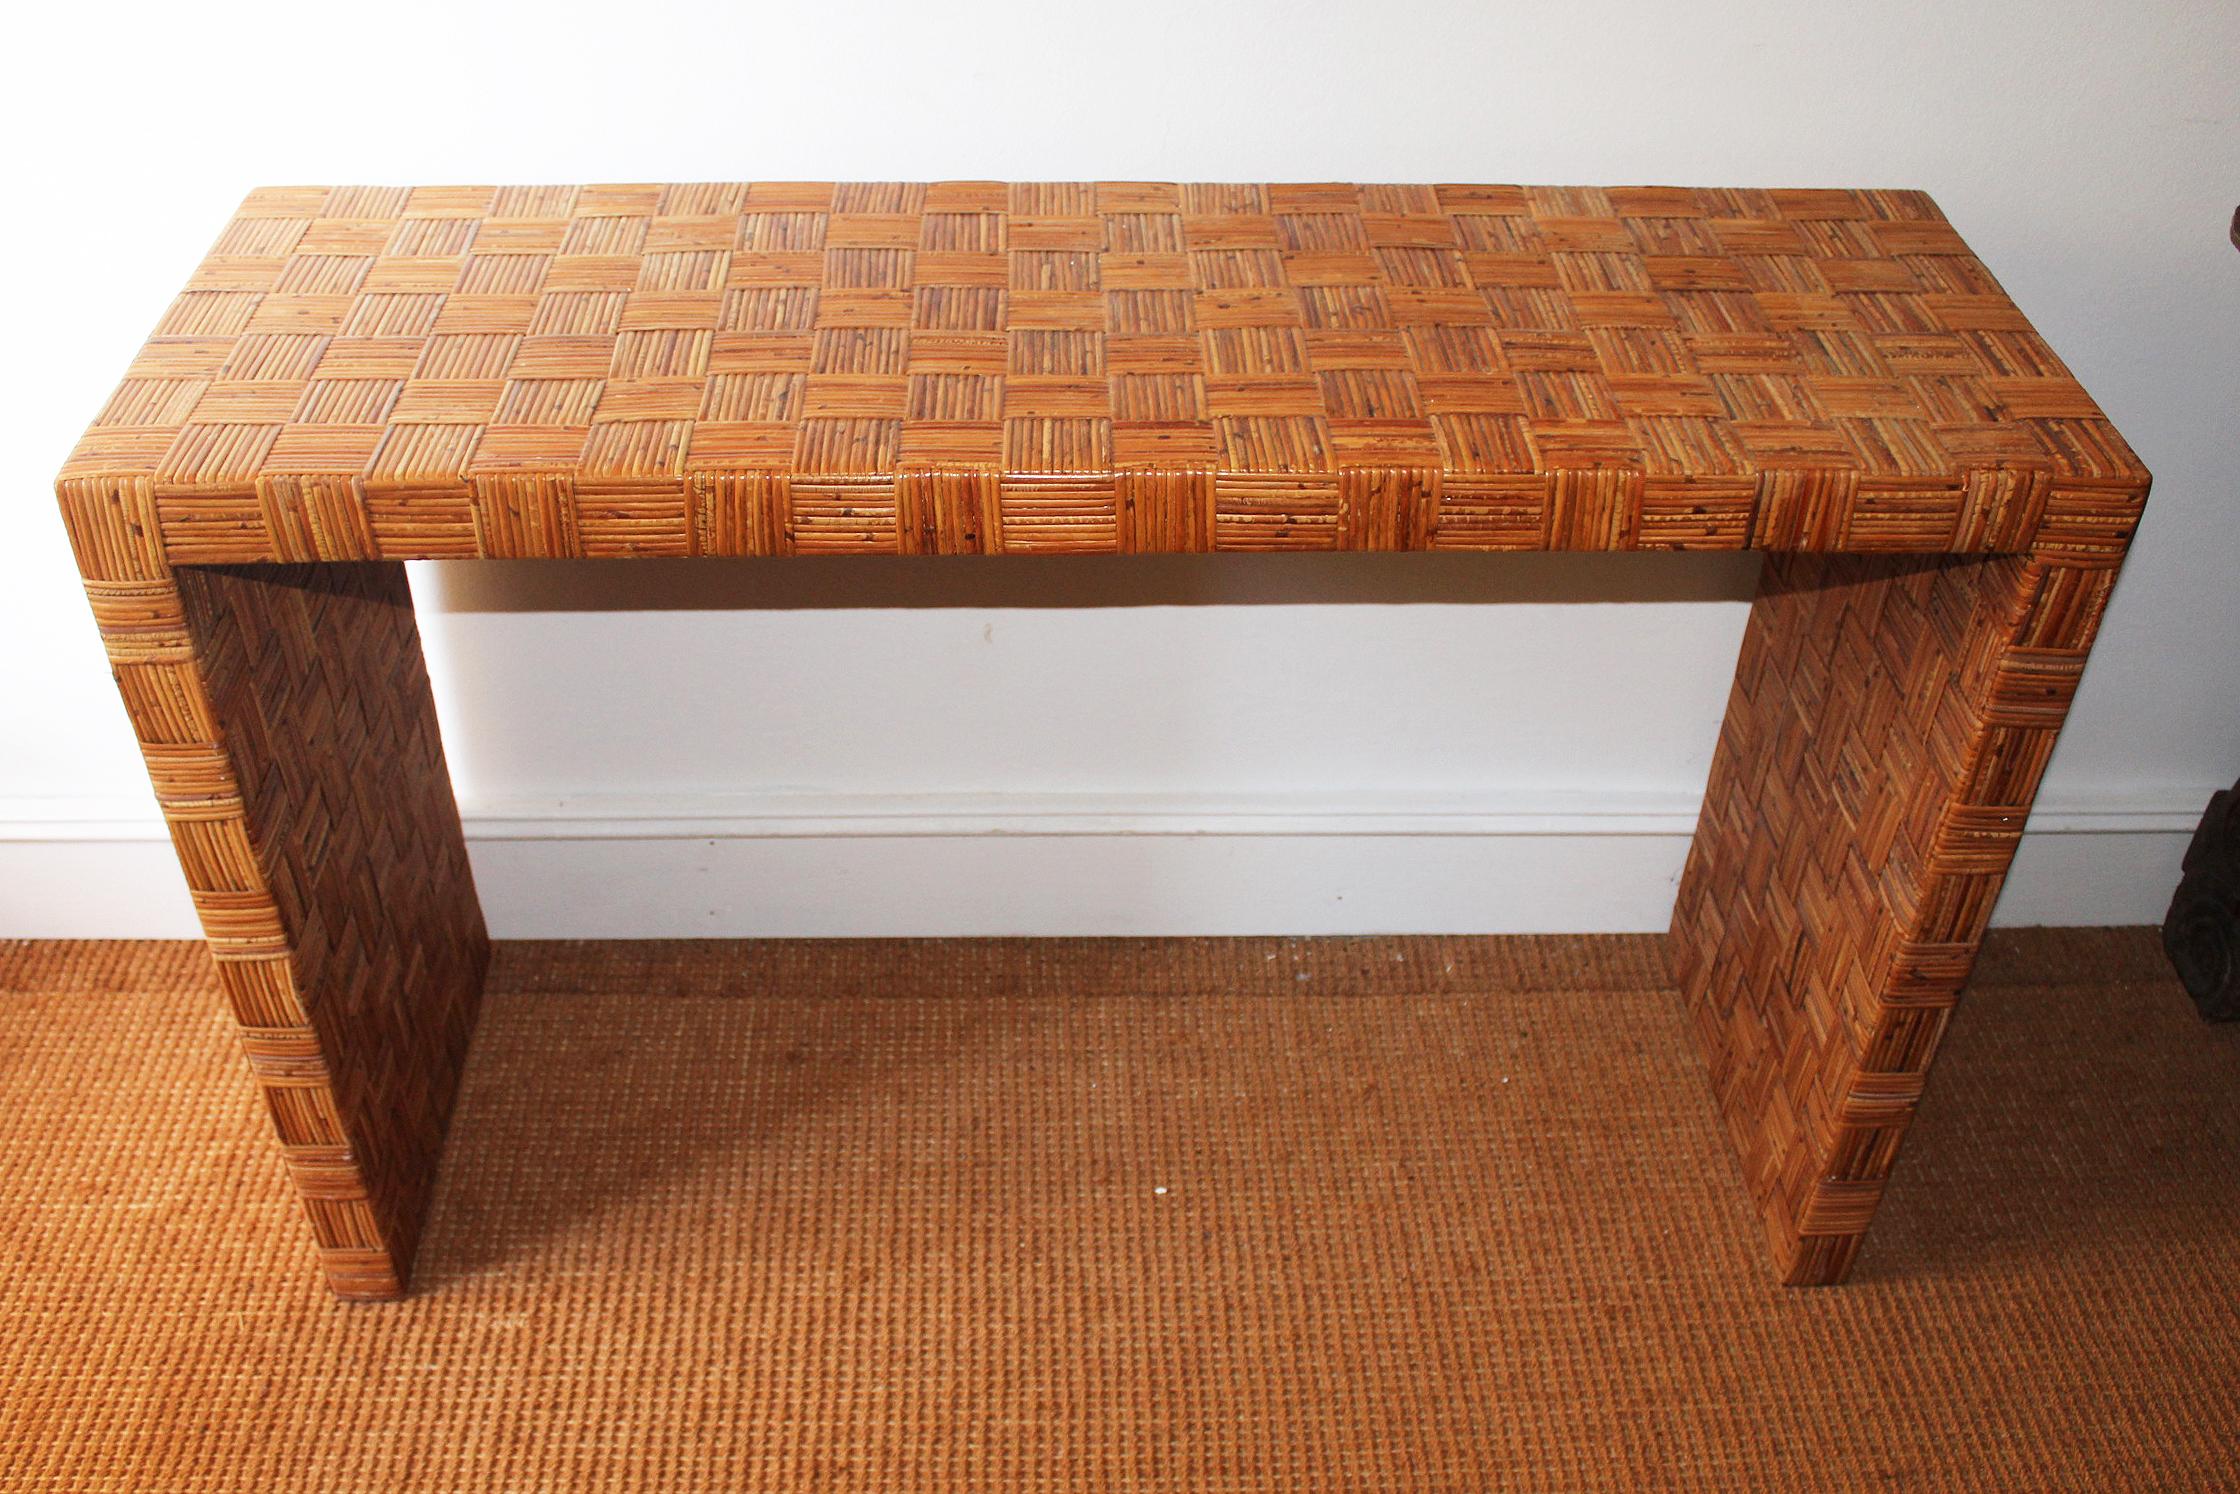 1990s Spanish simple and elegant console table using laced wicker in crisscross pattern.